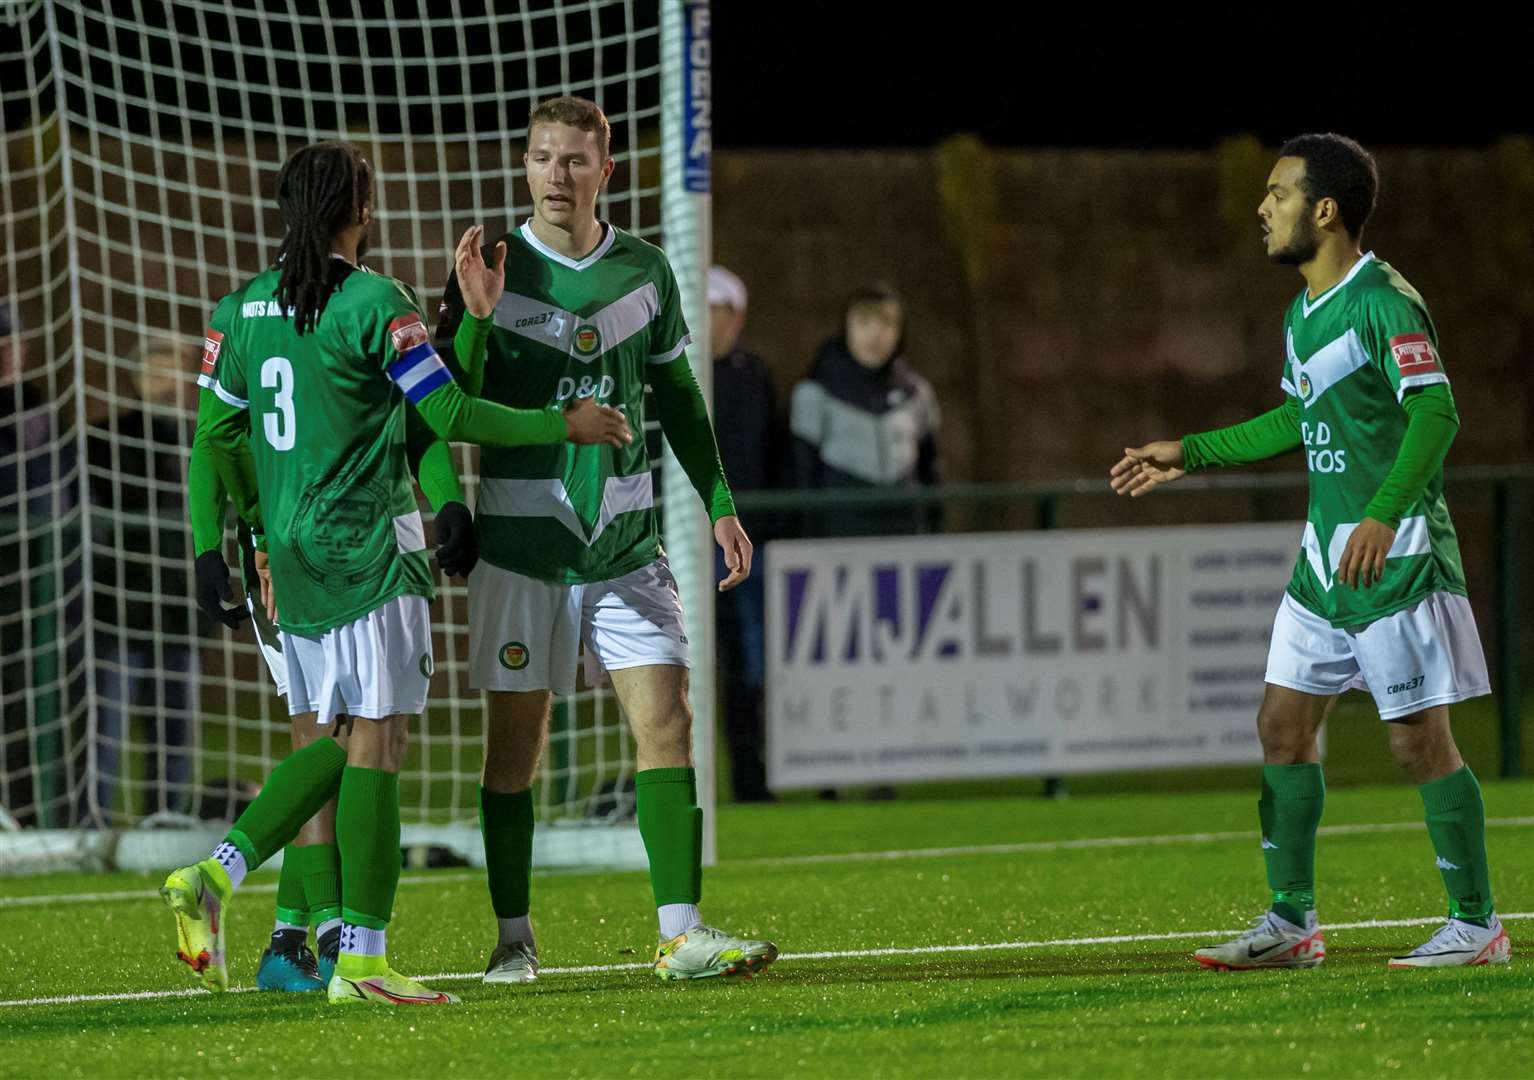 Harvey Brand celebrates his goal with skipper Bradley Simms and Tariq Ossai as Ashford go 2-1 up on Westfield. Picture: Ian Scammell